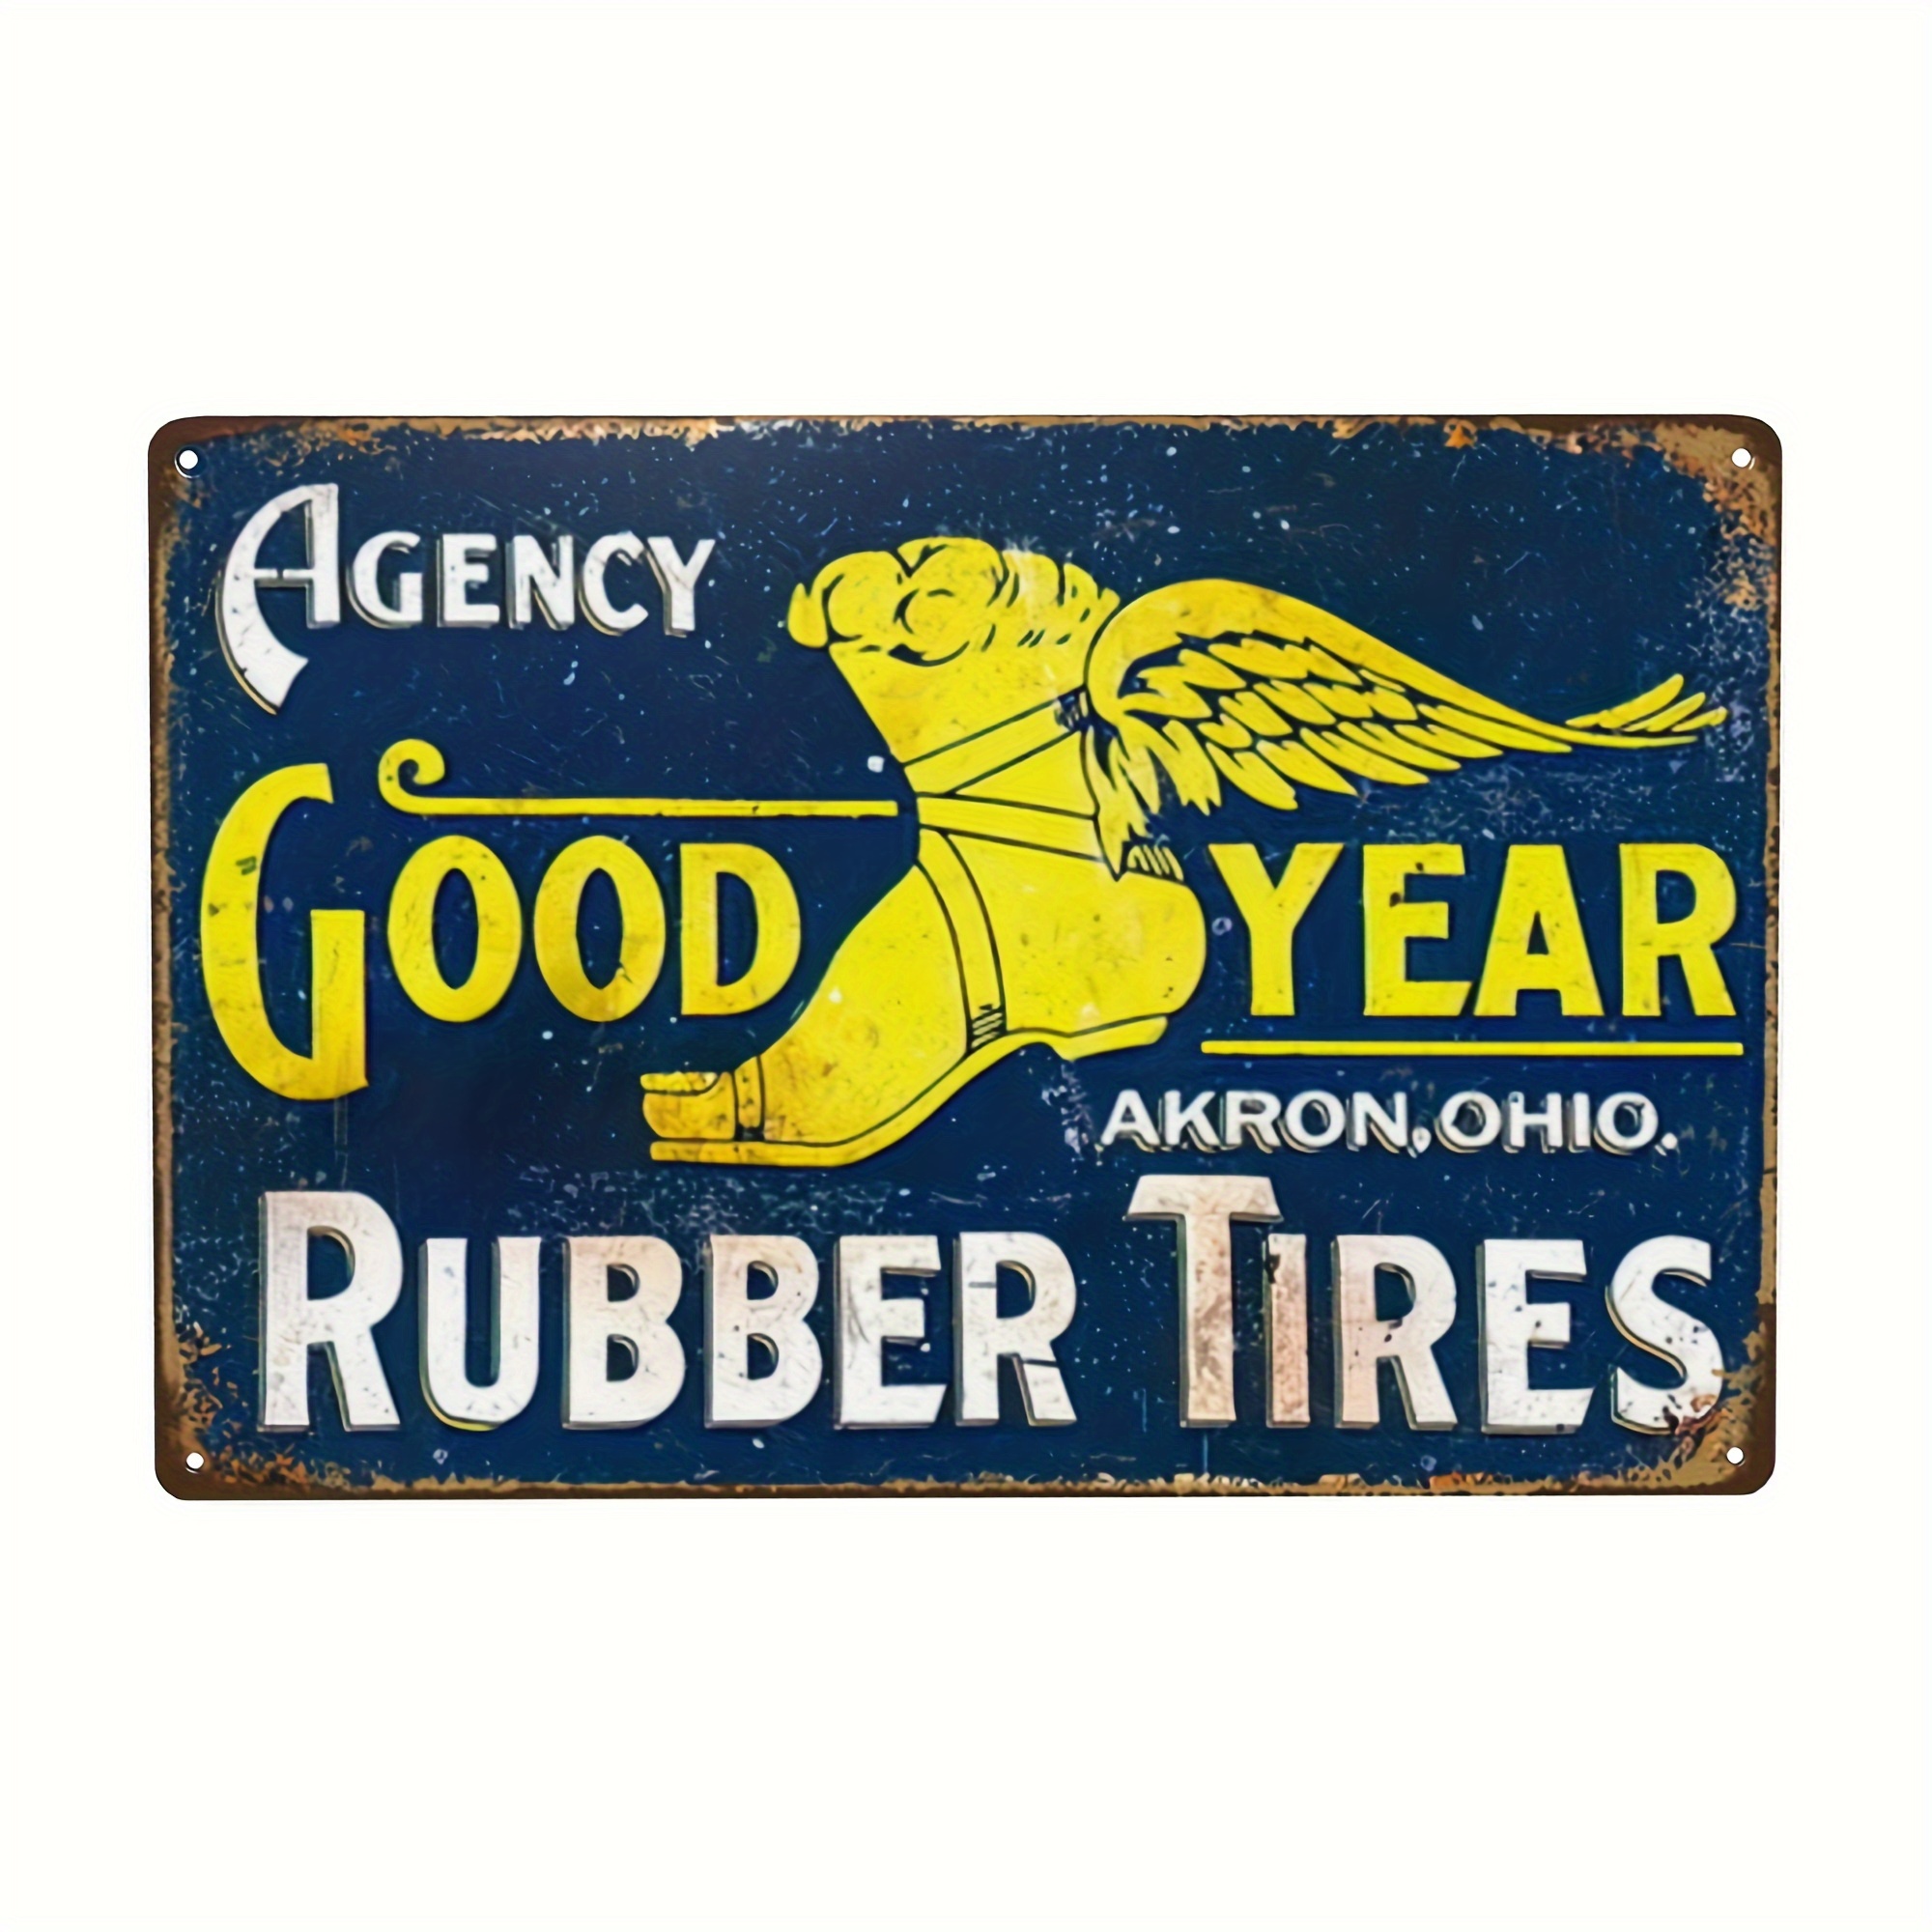 

1pc Retro Metal Tin Sign, Car And Motor Tire Metal Sign, Wall Art Decor, Vintage Kitchen Bedroom Cafe Bar Pub Living Room Wall Decor Plaque, 8x12lnch